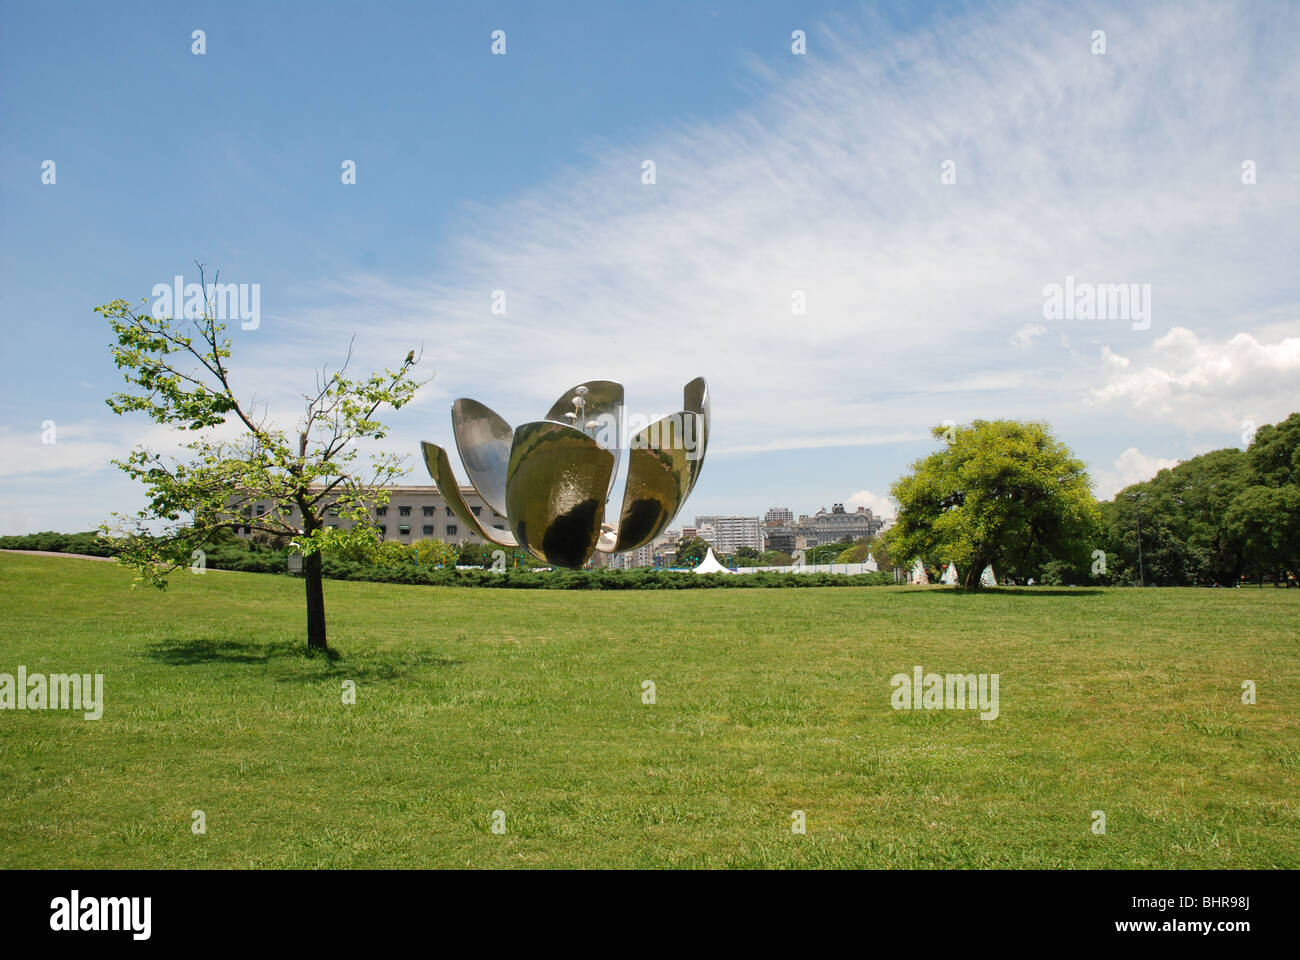 Floralis Generica - a huge moving sculpture of a flower in a Buenos Aires park setting Stock Photo